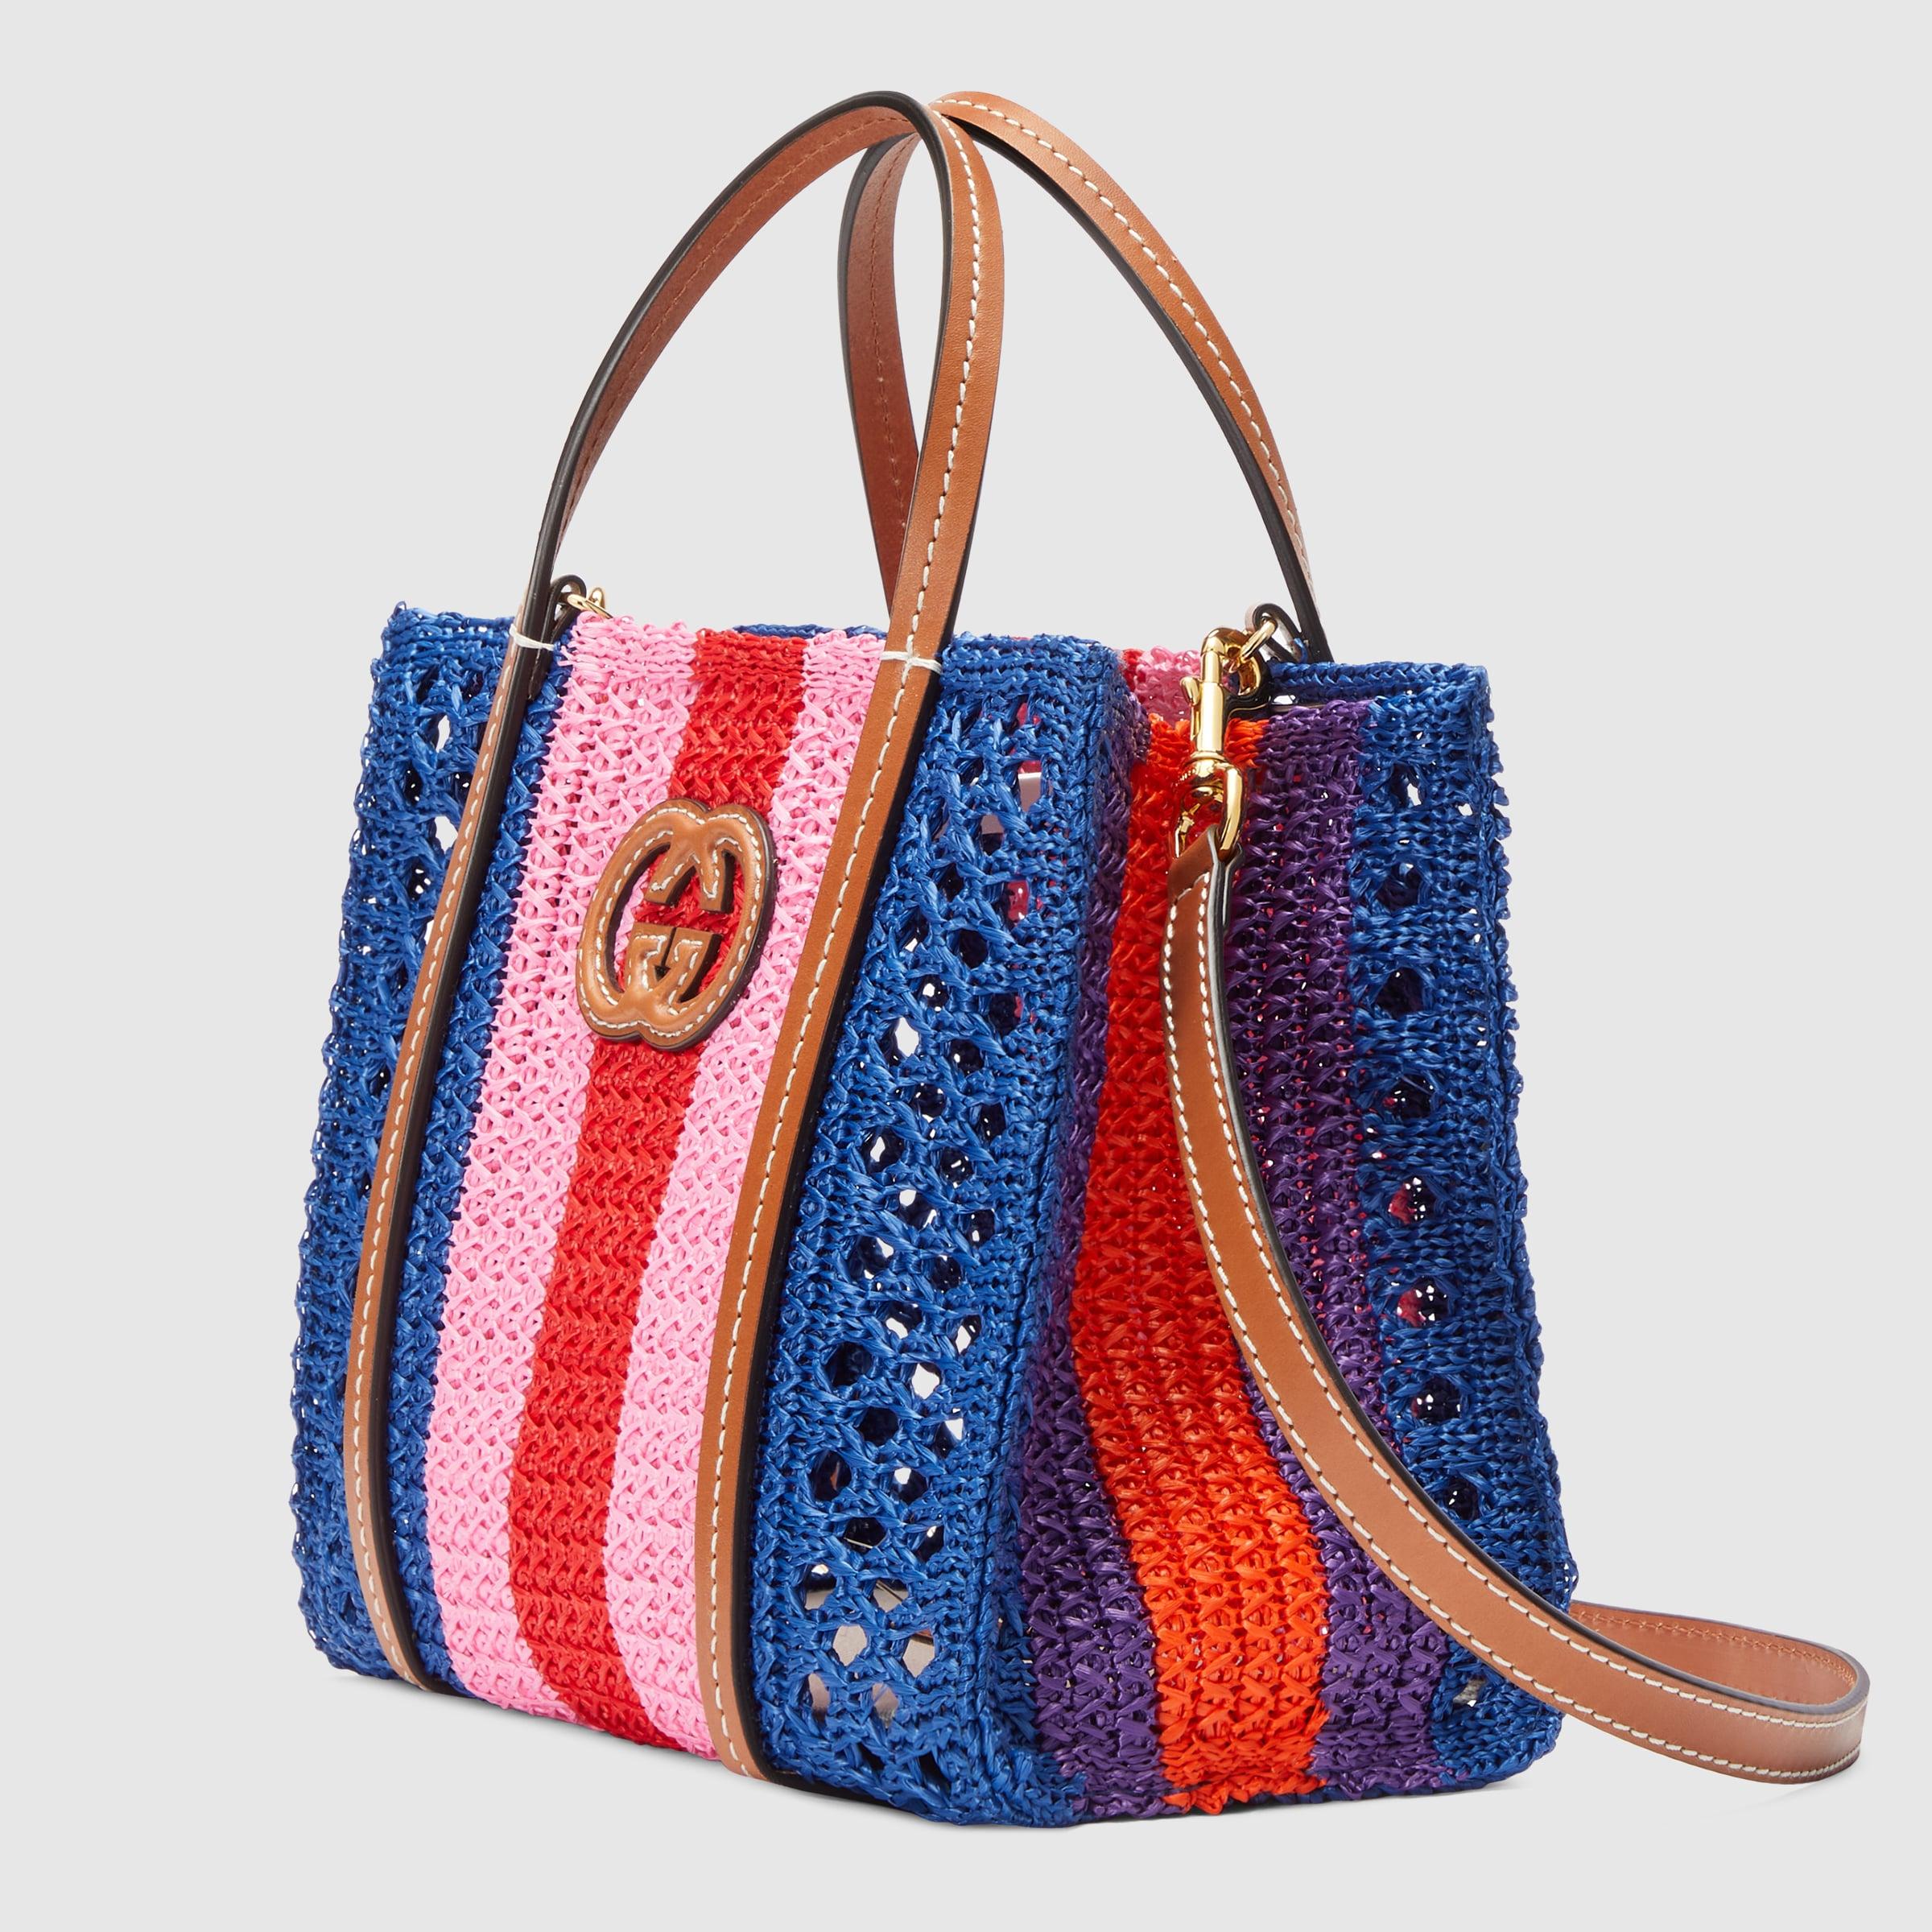 Small tote bag with Interlocking G